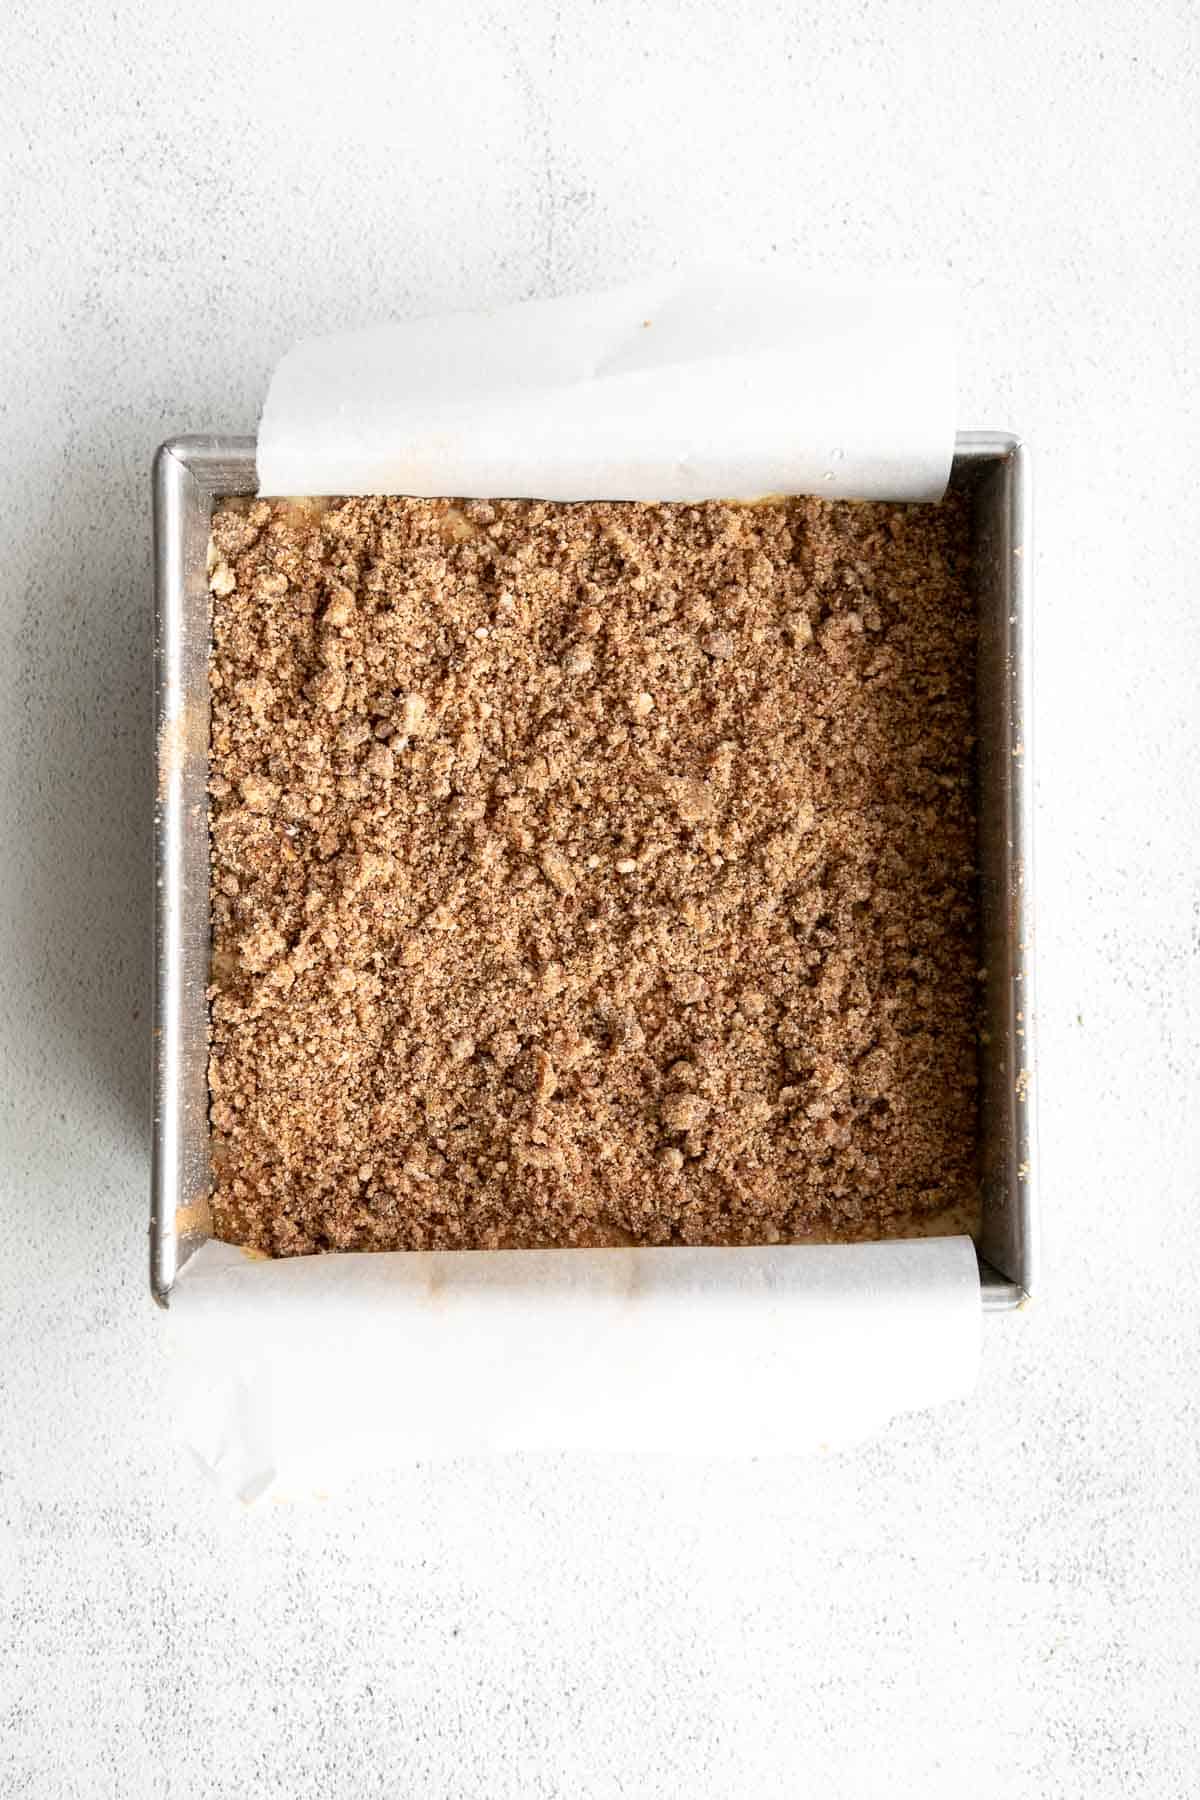 coffee cake in a baking pan before going in the oven